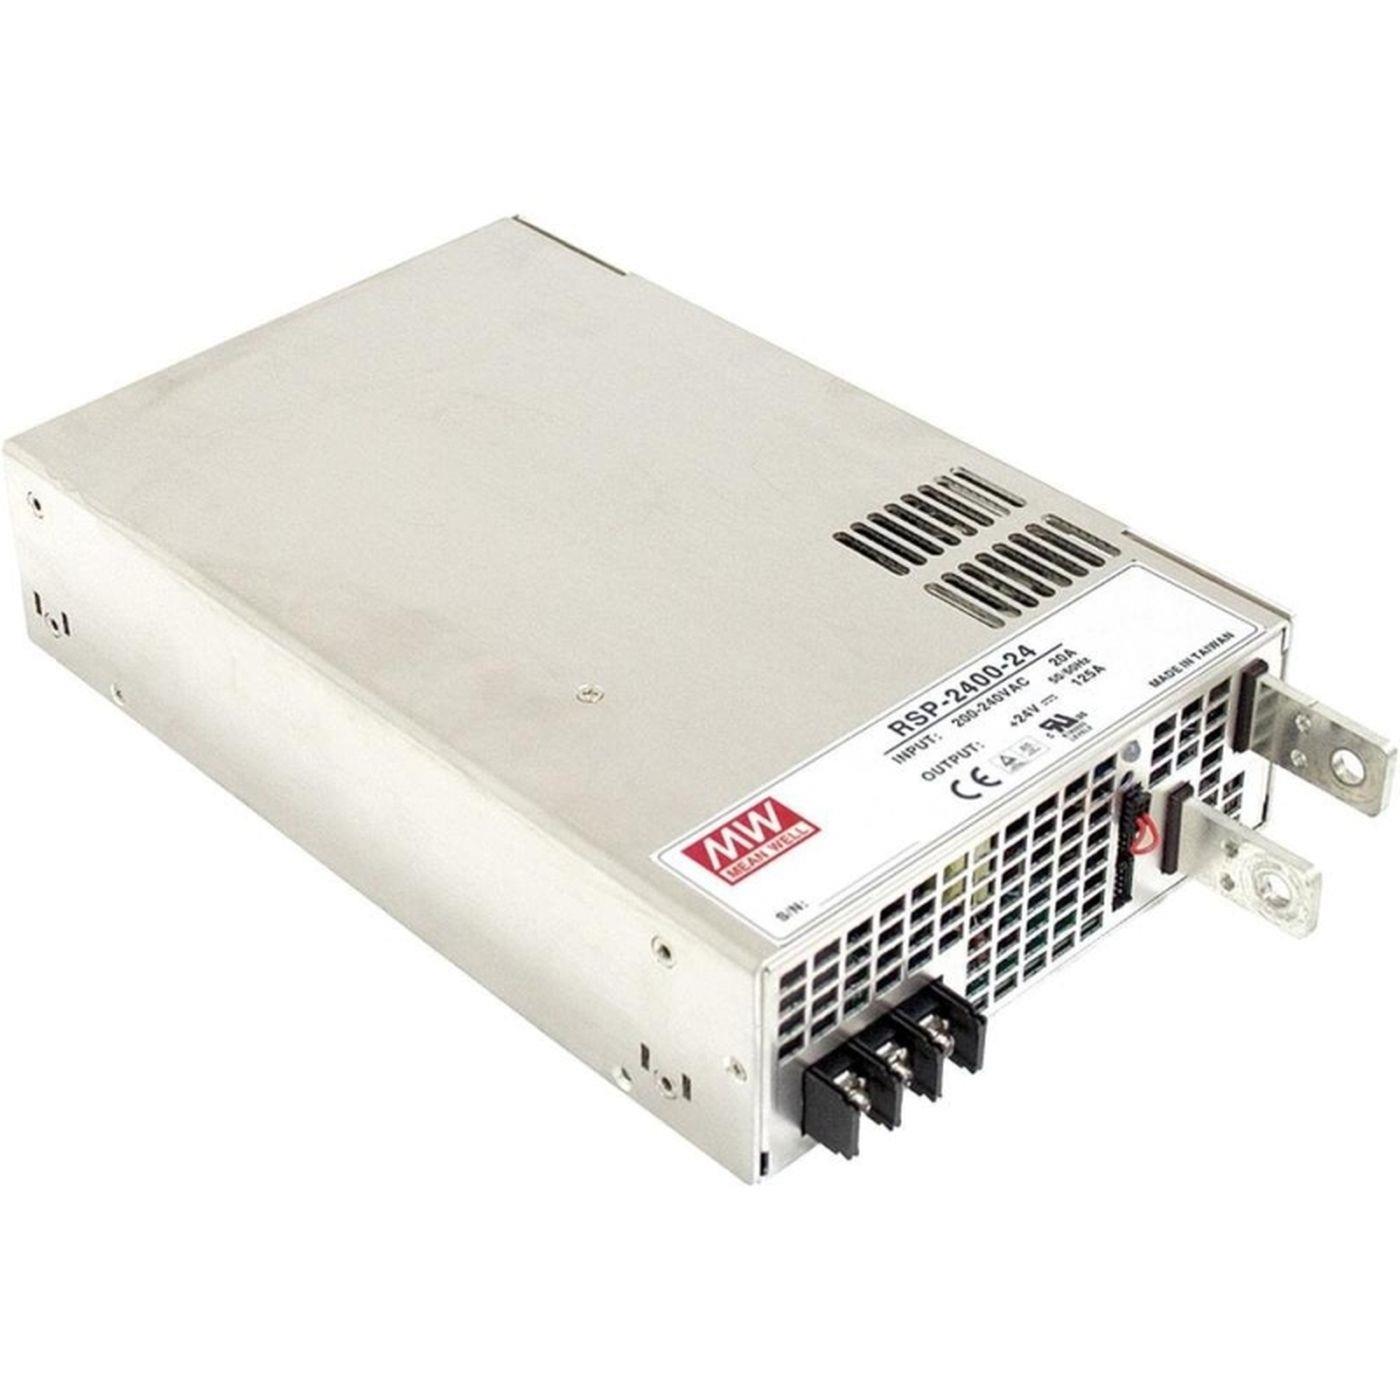 RSP-2400-48 2400W 48V 50A Industrial power supply